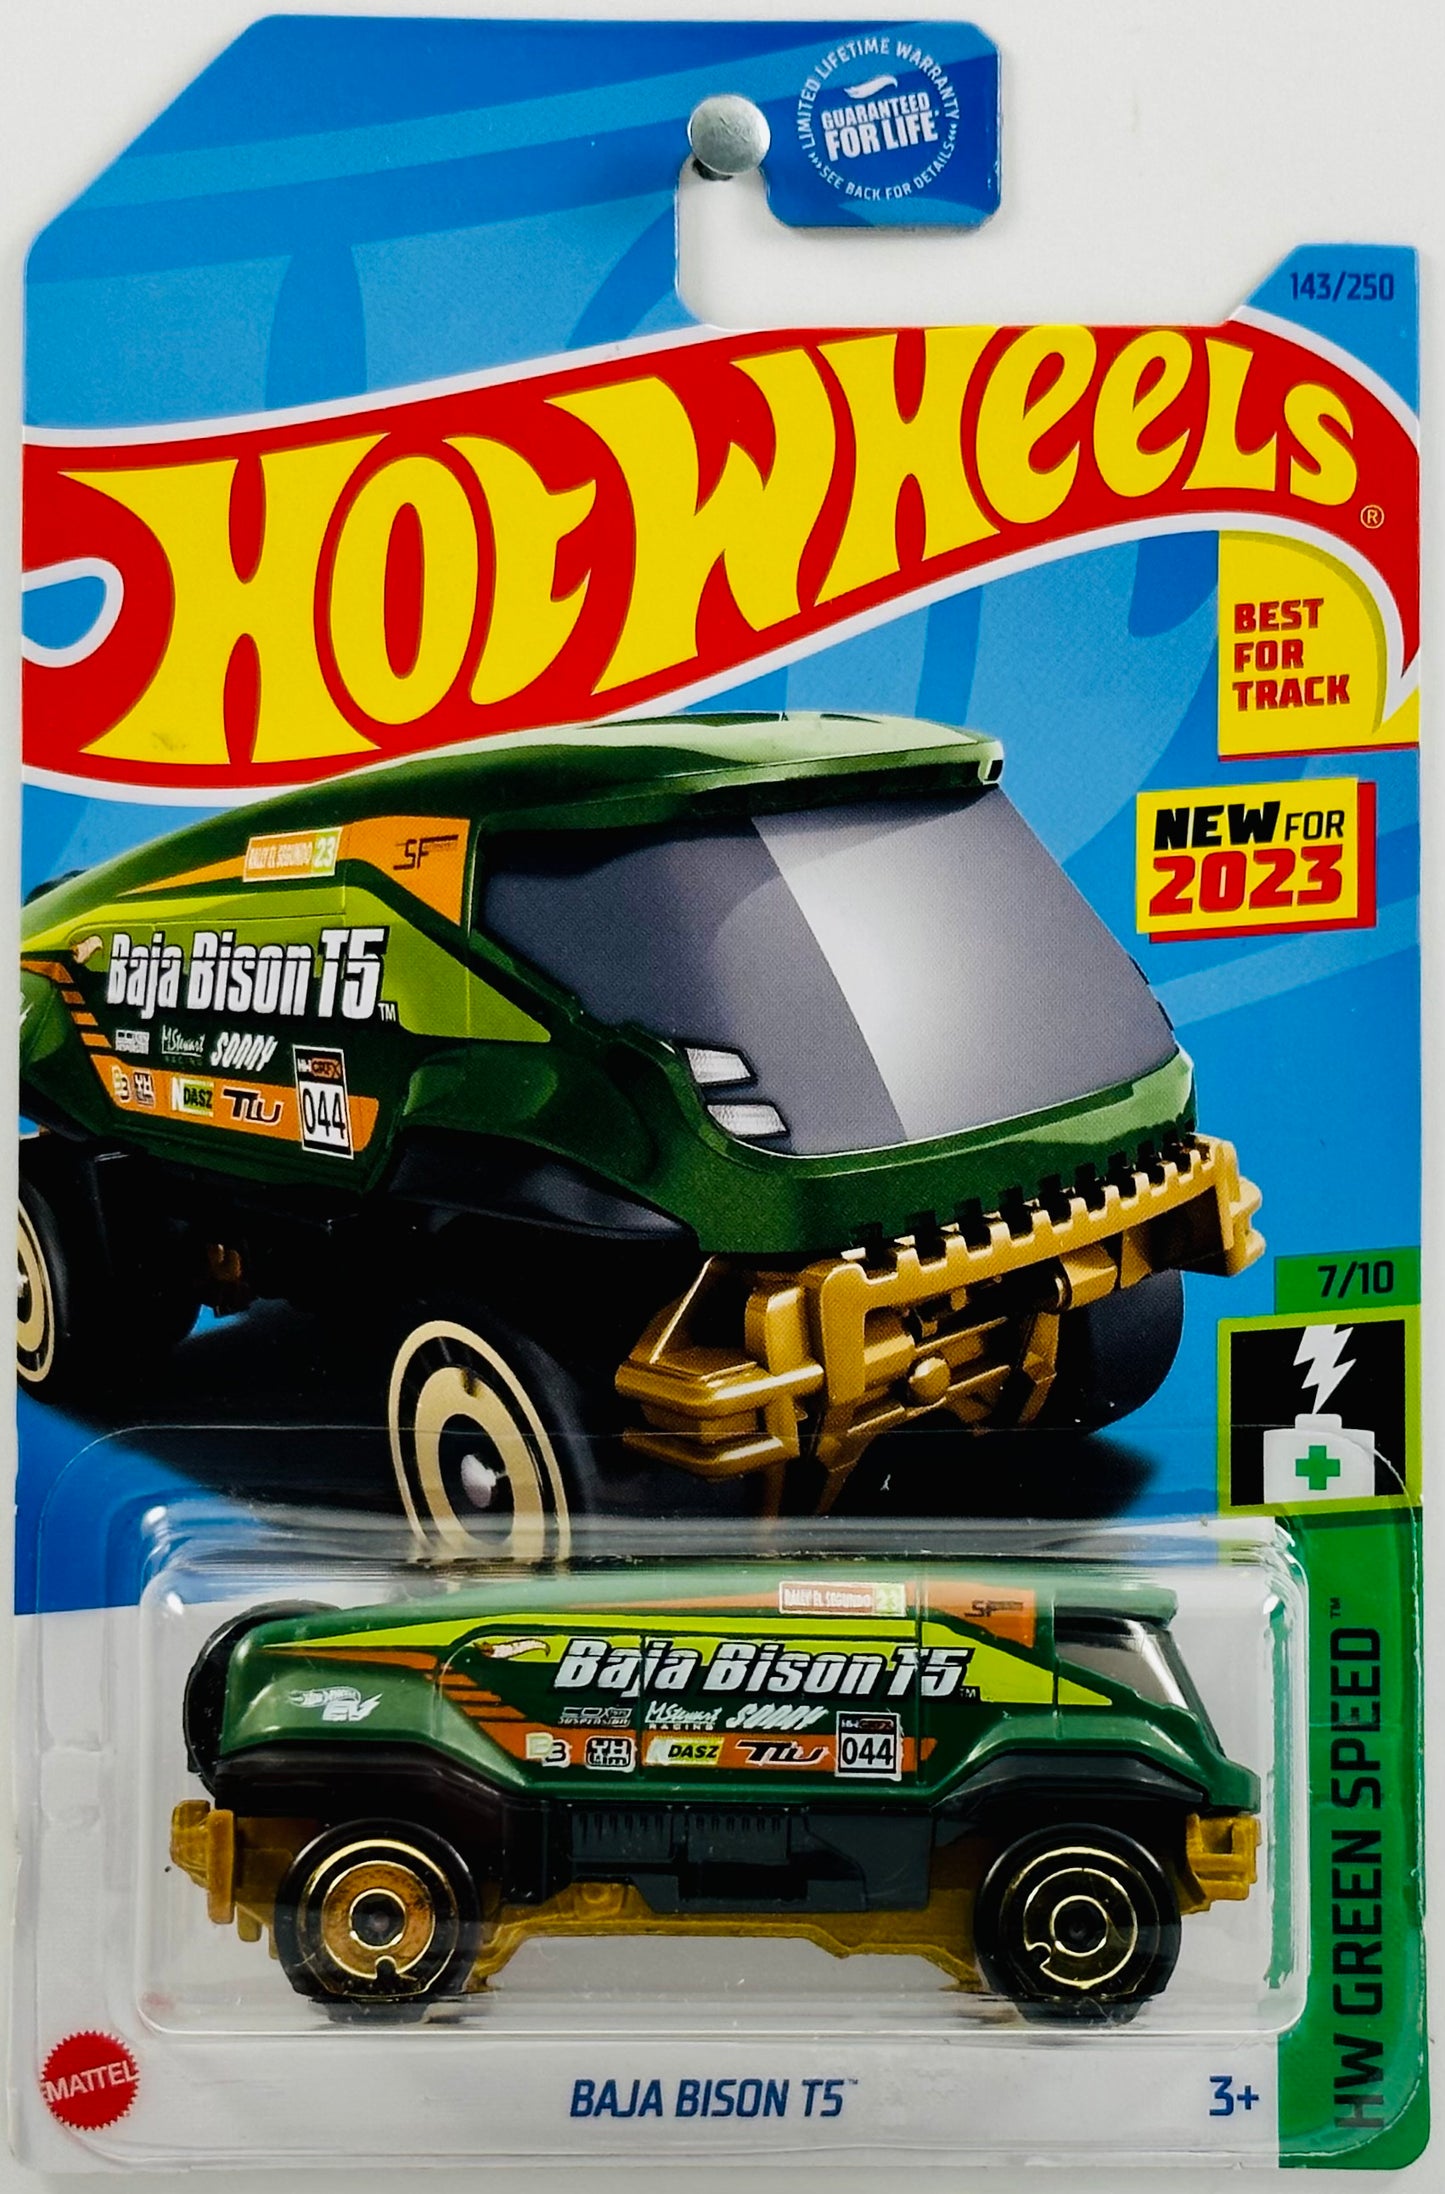 Hot Wheels 2023 - Collector # 143/250 - HW Green Speed 07/10 - New Models - Baja Bison T5 - Green - USA